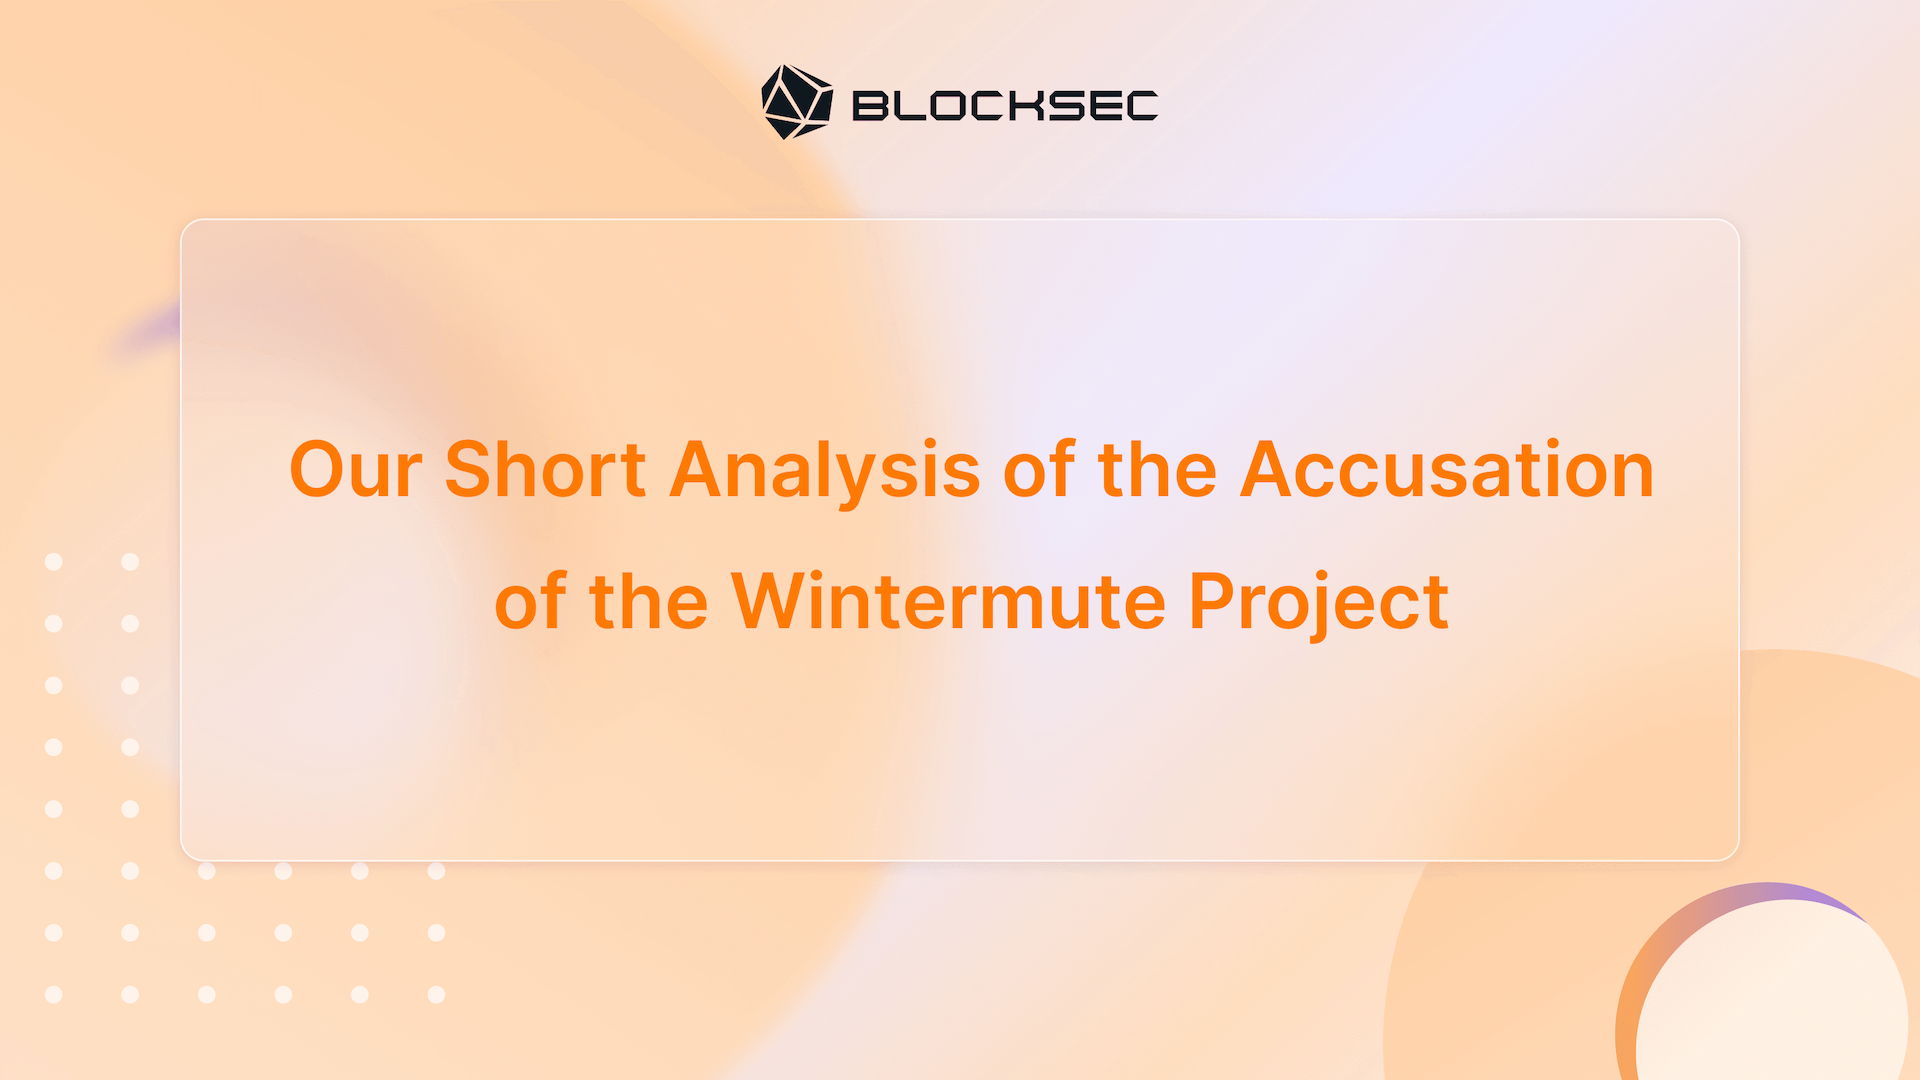 Our Short Analysis of the Accusation of the Wintermute Project